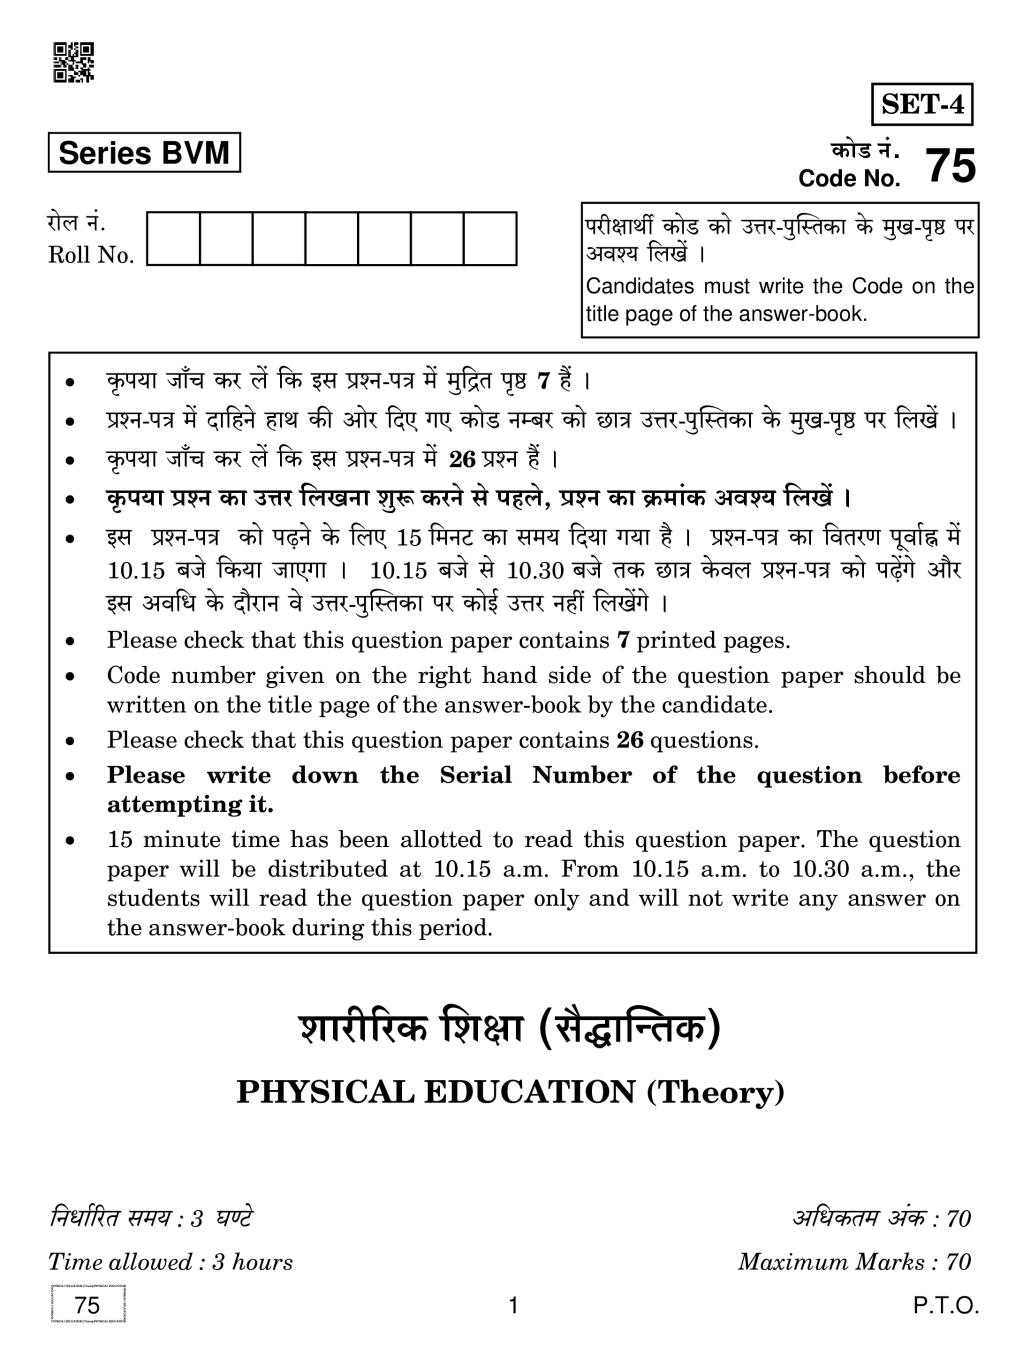 CBSE Class 12 Physical Education Question Paper 2019 - Page 1